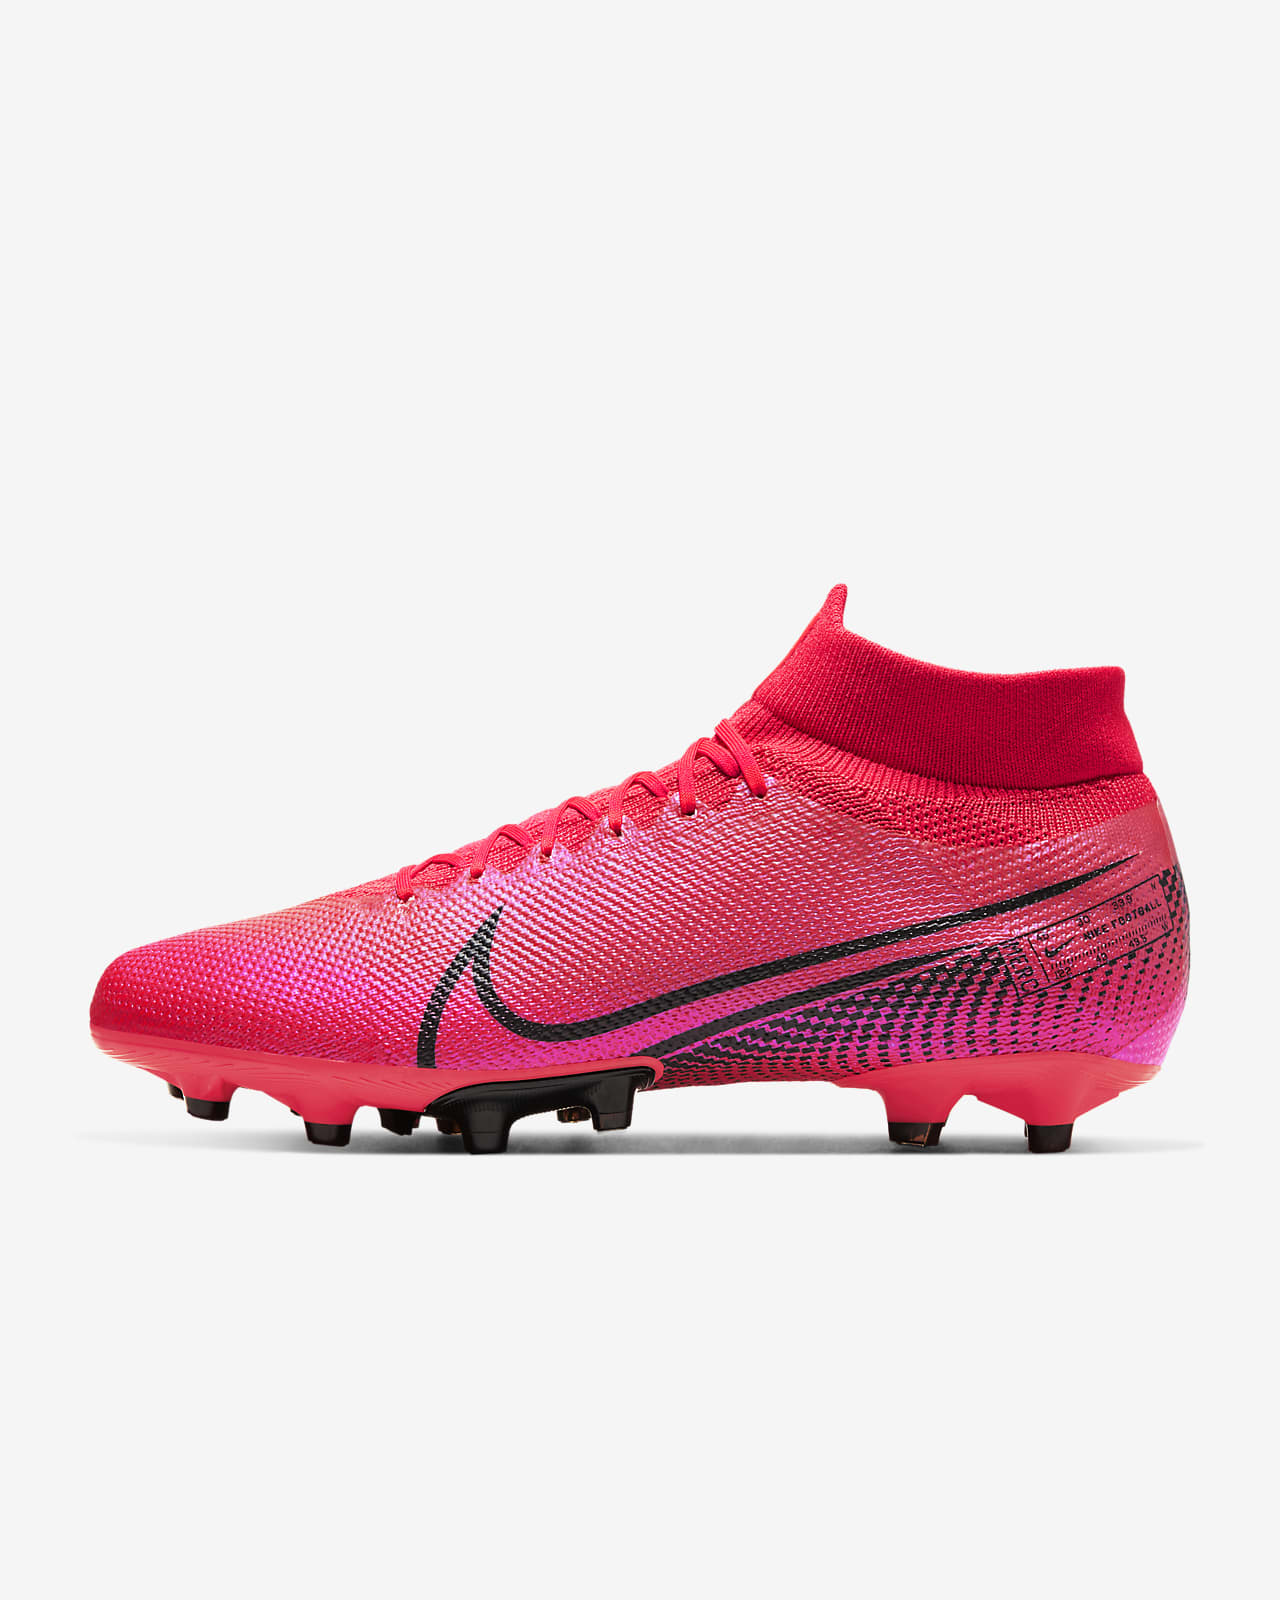 Nike Mercurial Superfly 7 Pro AG-PRO Artificial-Grass Soccer Cleat. Nike JP